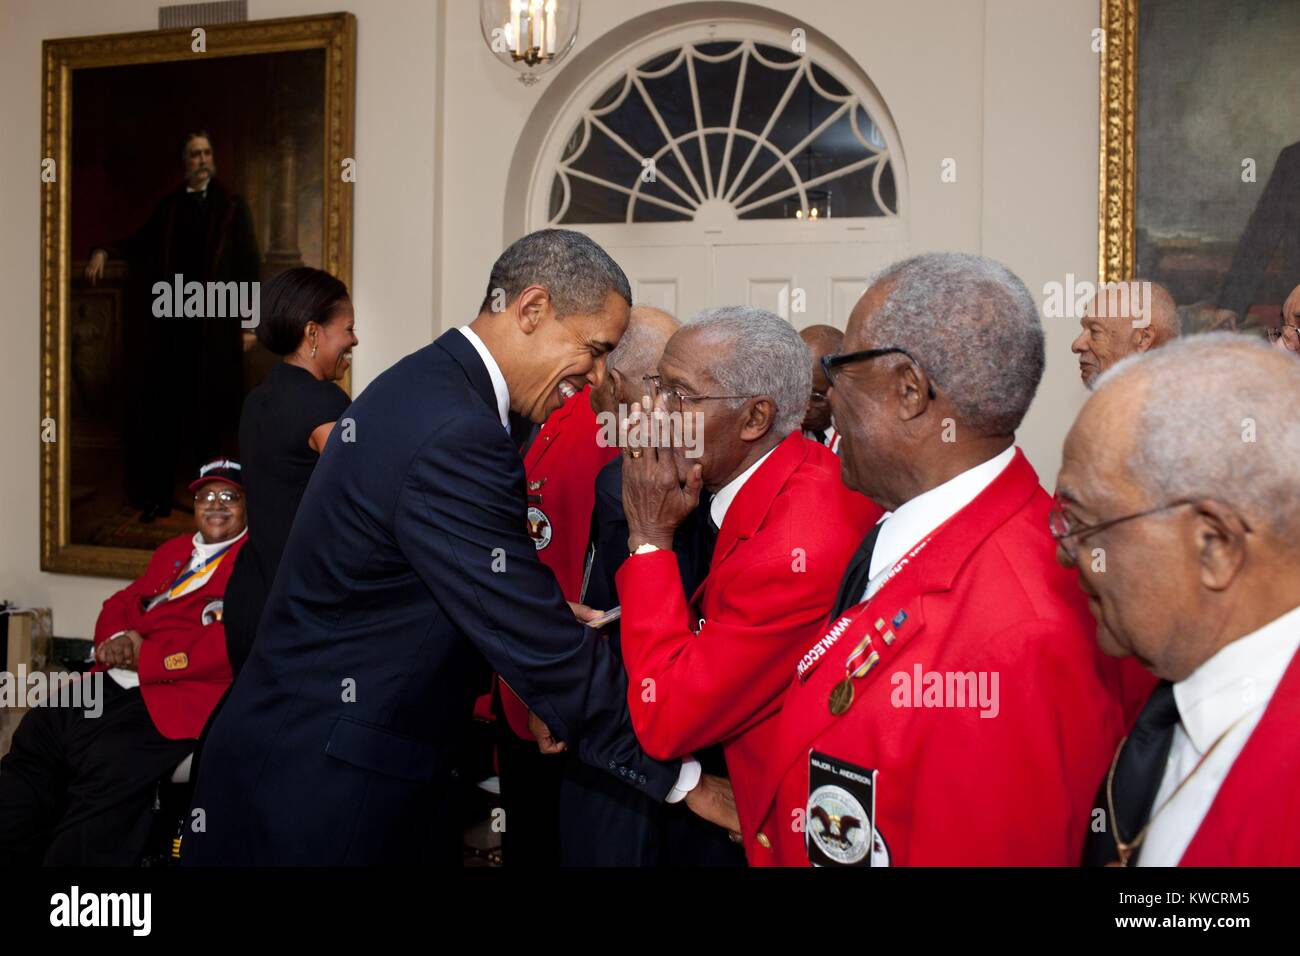 President Barack and Michelle Obama greet Tuskegee Airmen. Jan. 13, 2012. They were attending a screening of the film RED TAILS, in the White House family theater. (BSLOC 2015 3 76) Stock Photo